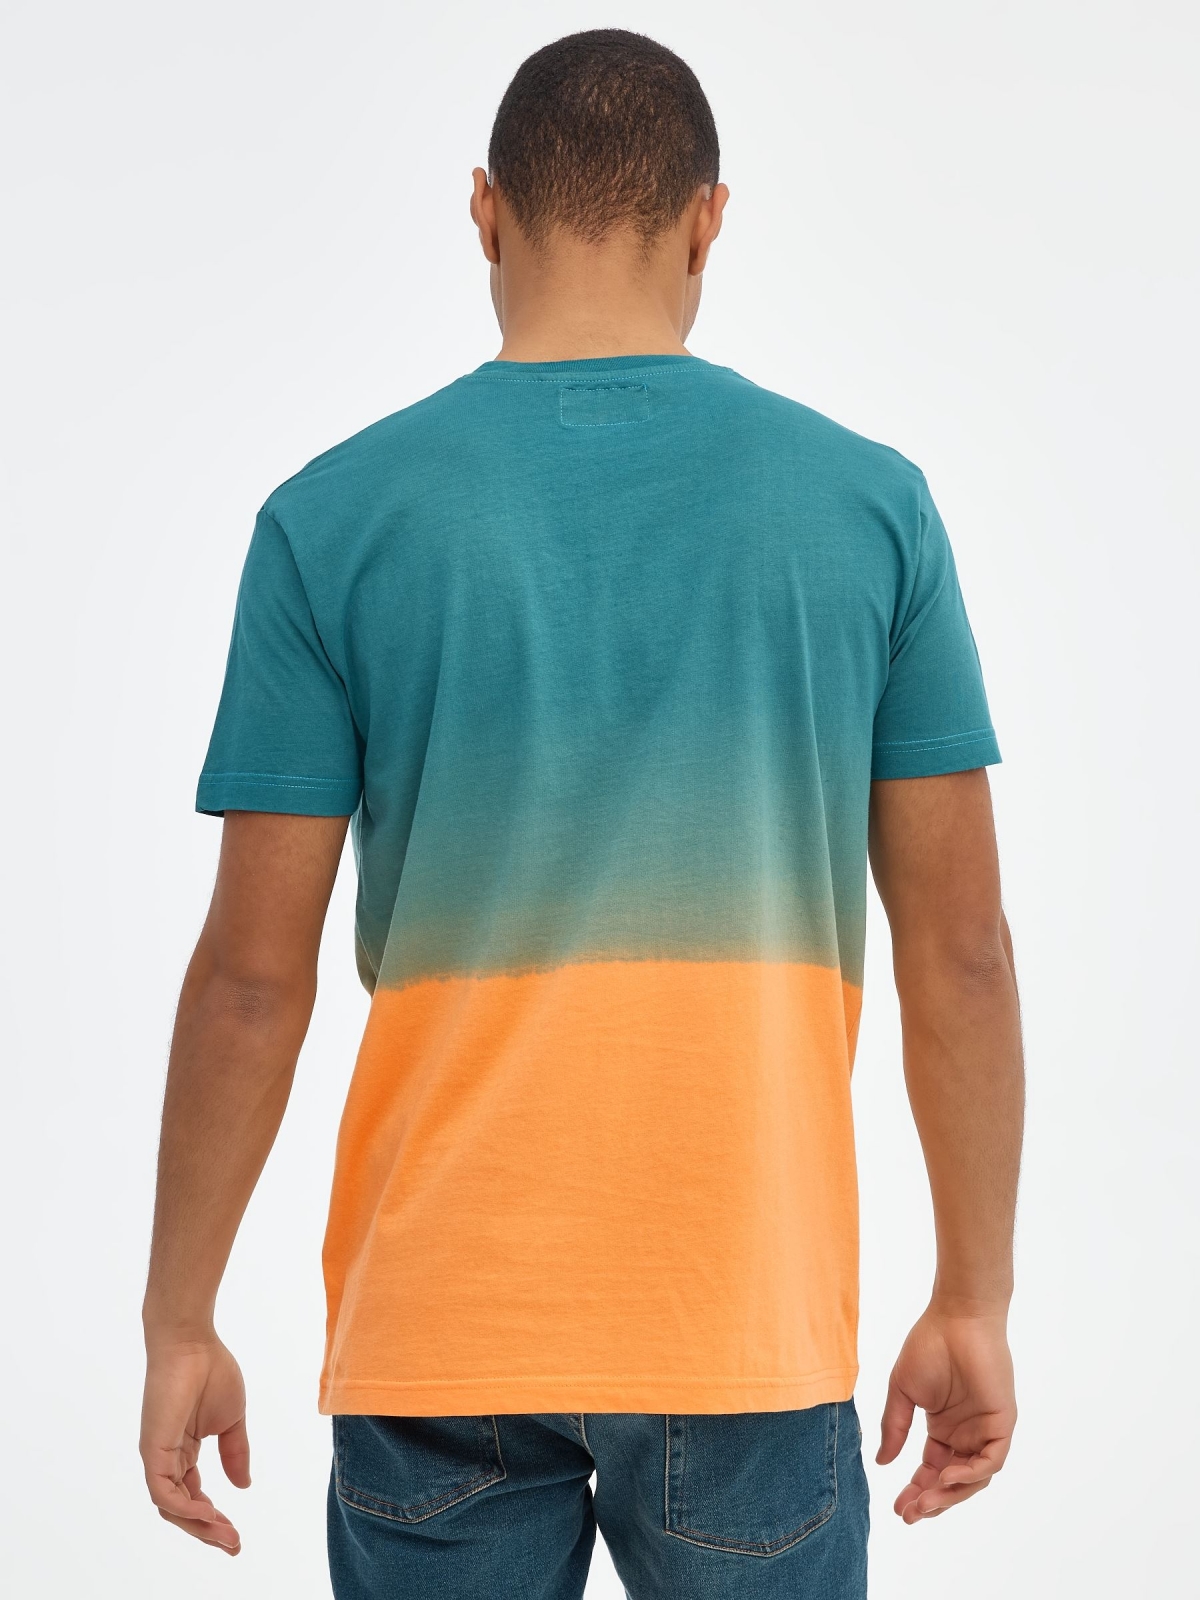 Gradient print t-shirt emerald middle back view